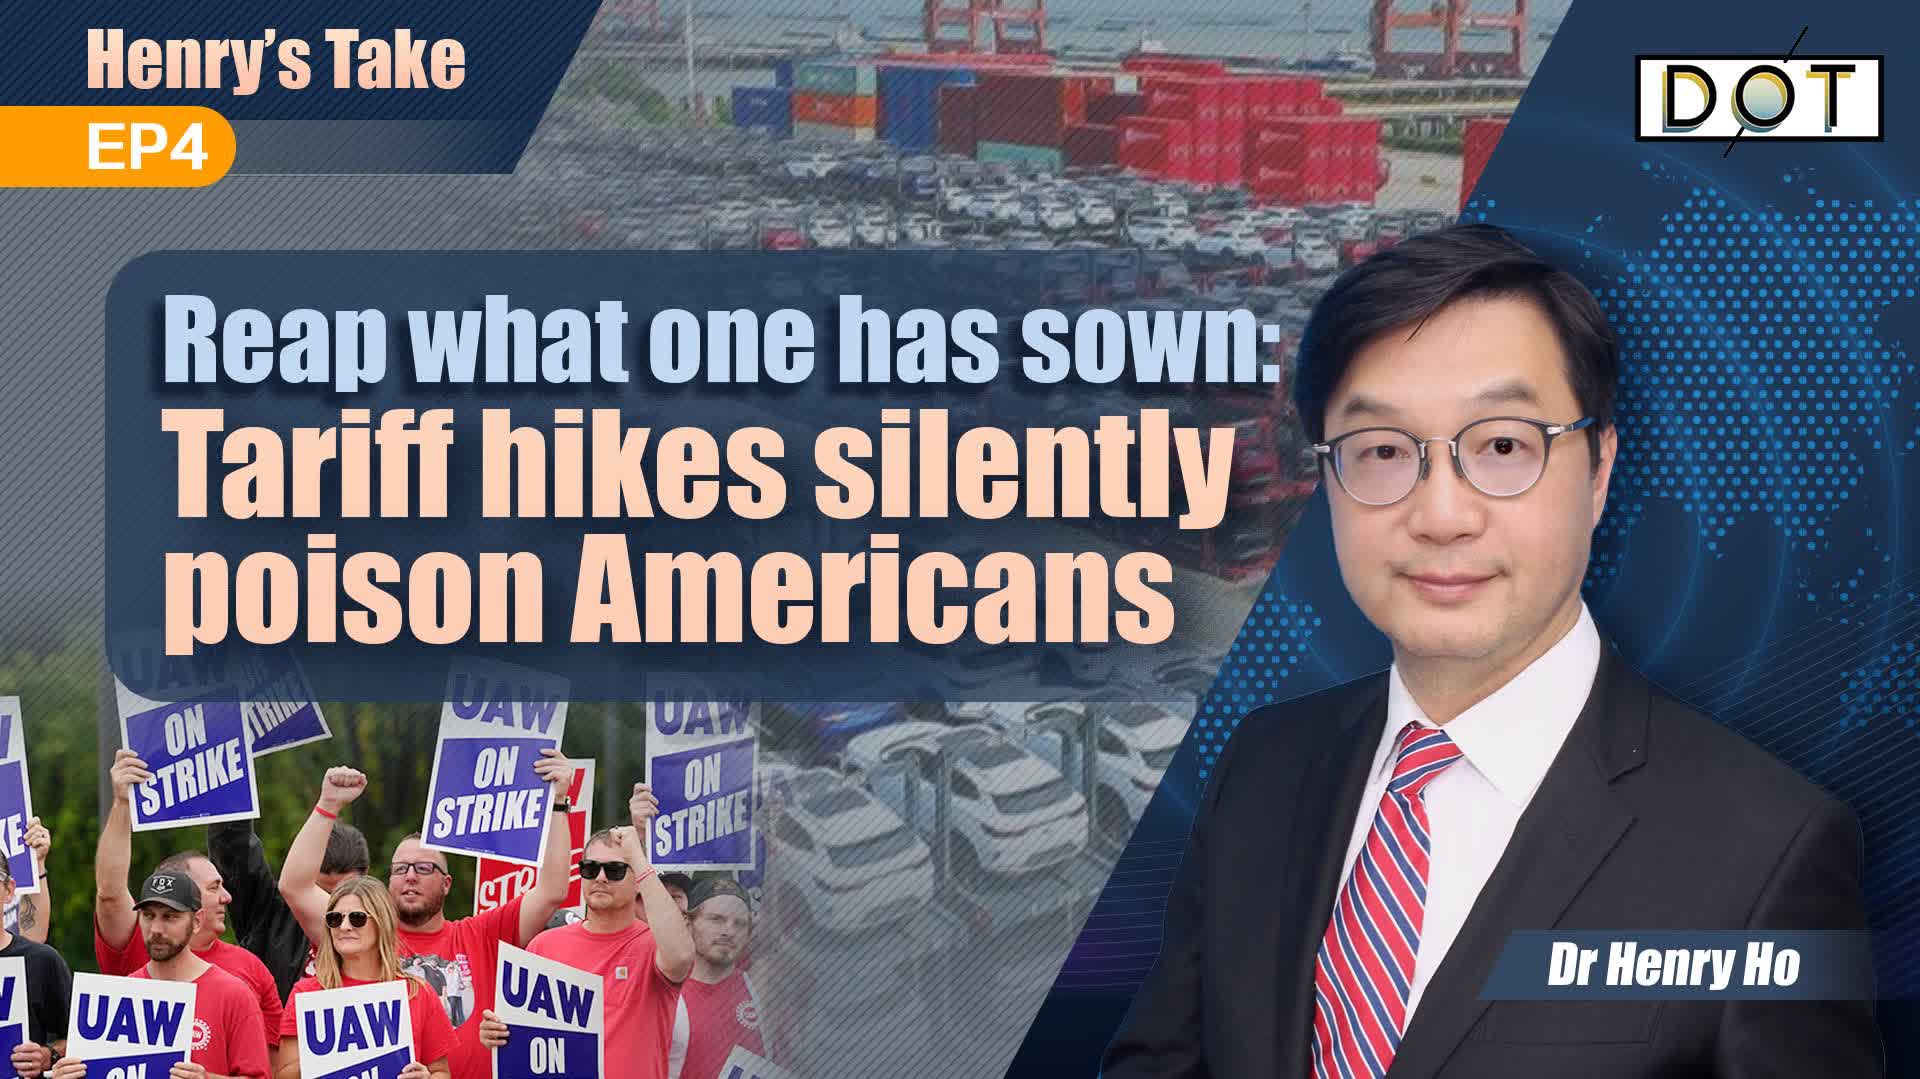 Henry's Take EP4 | Reap what one has sown: Tariff hikes silently poison Americans